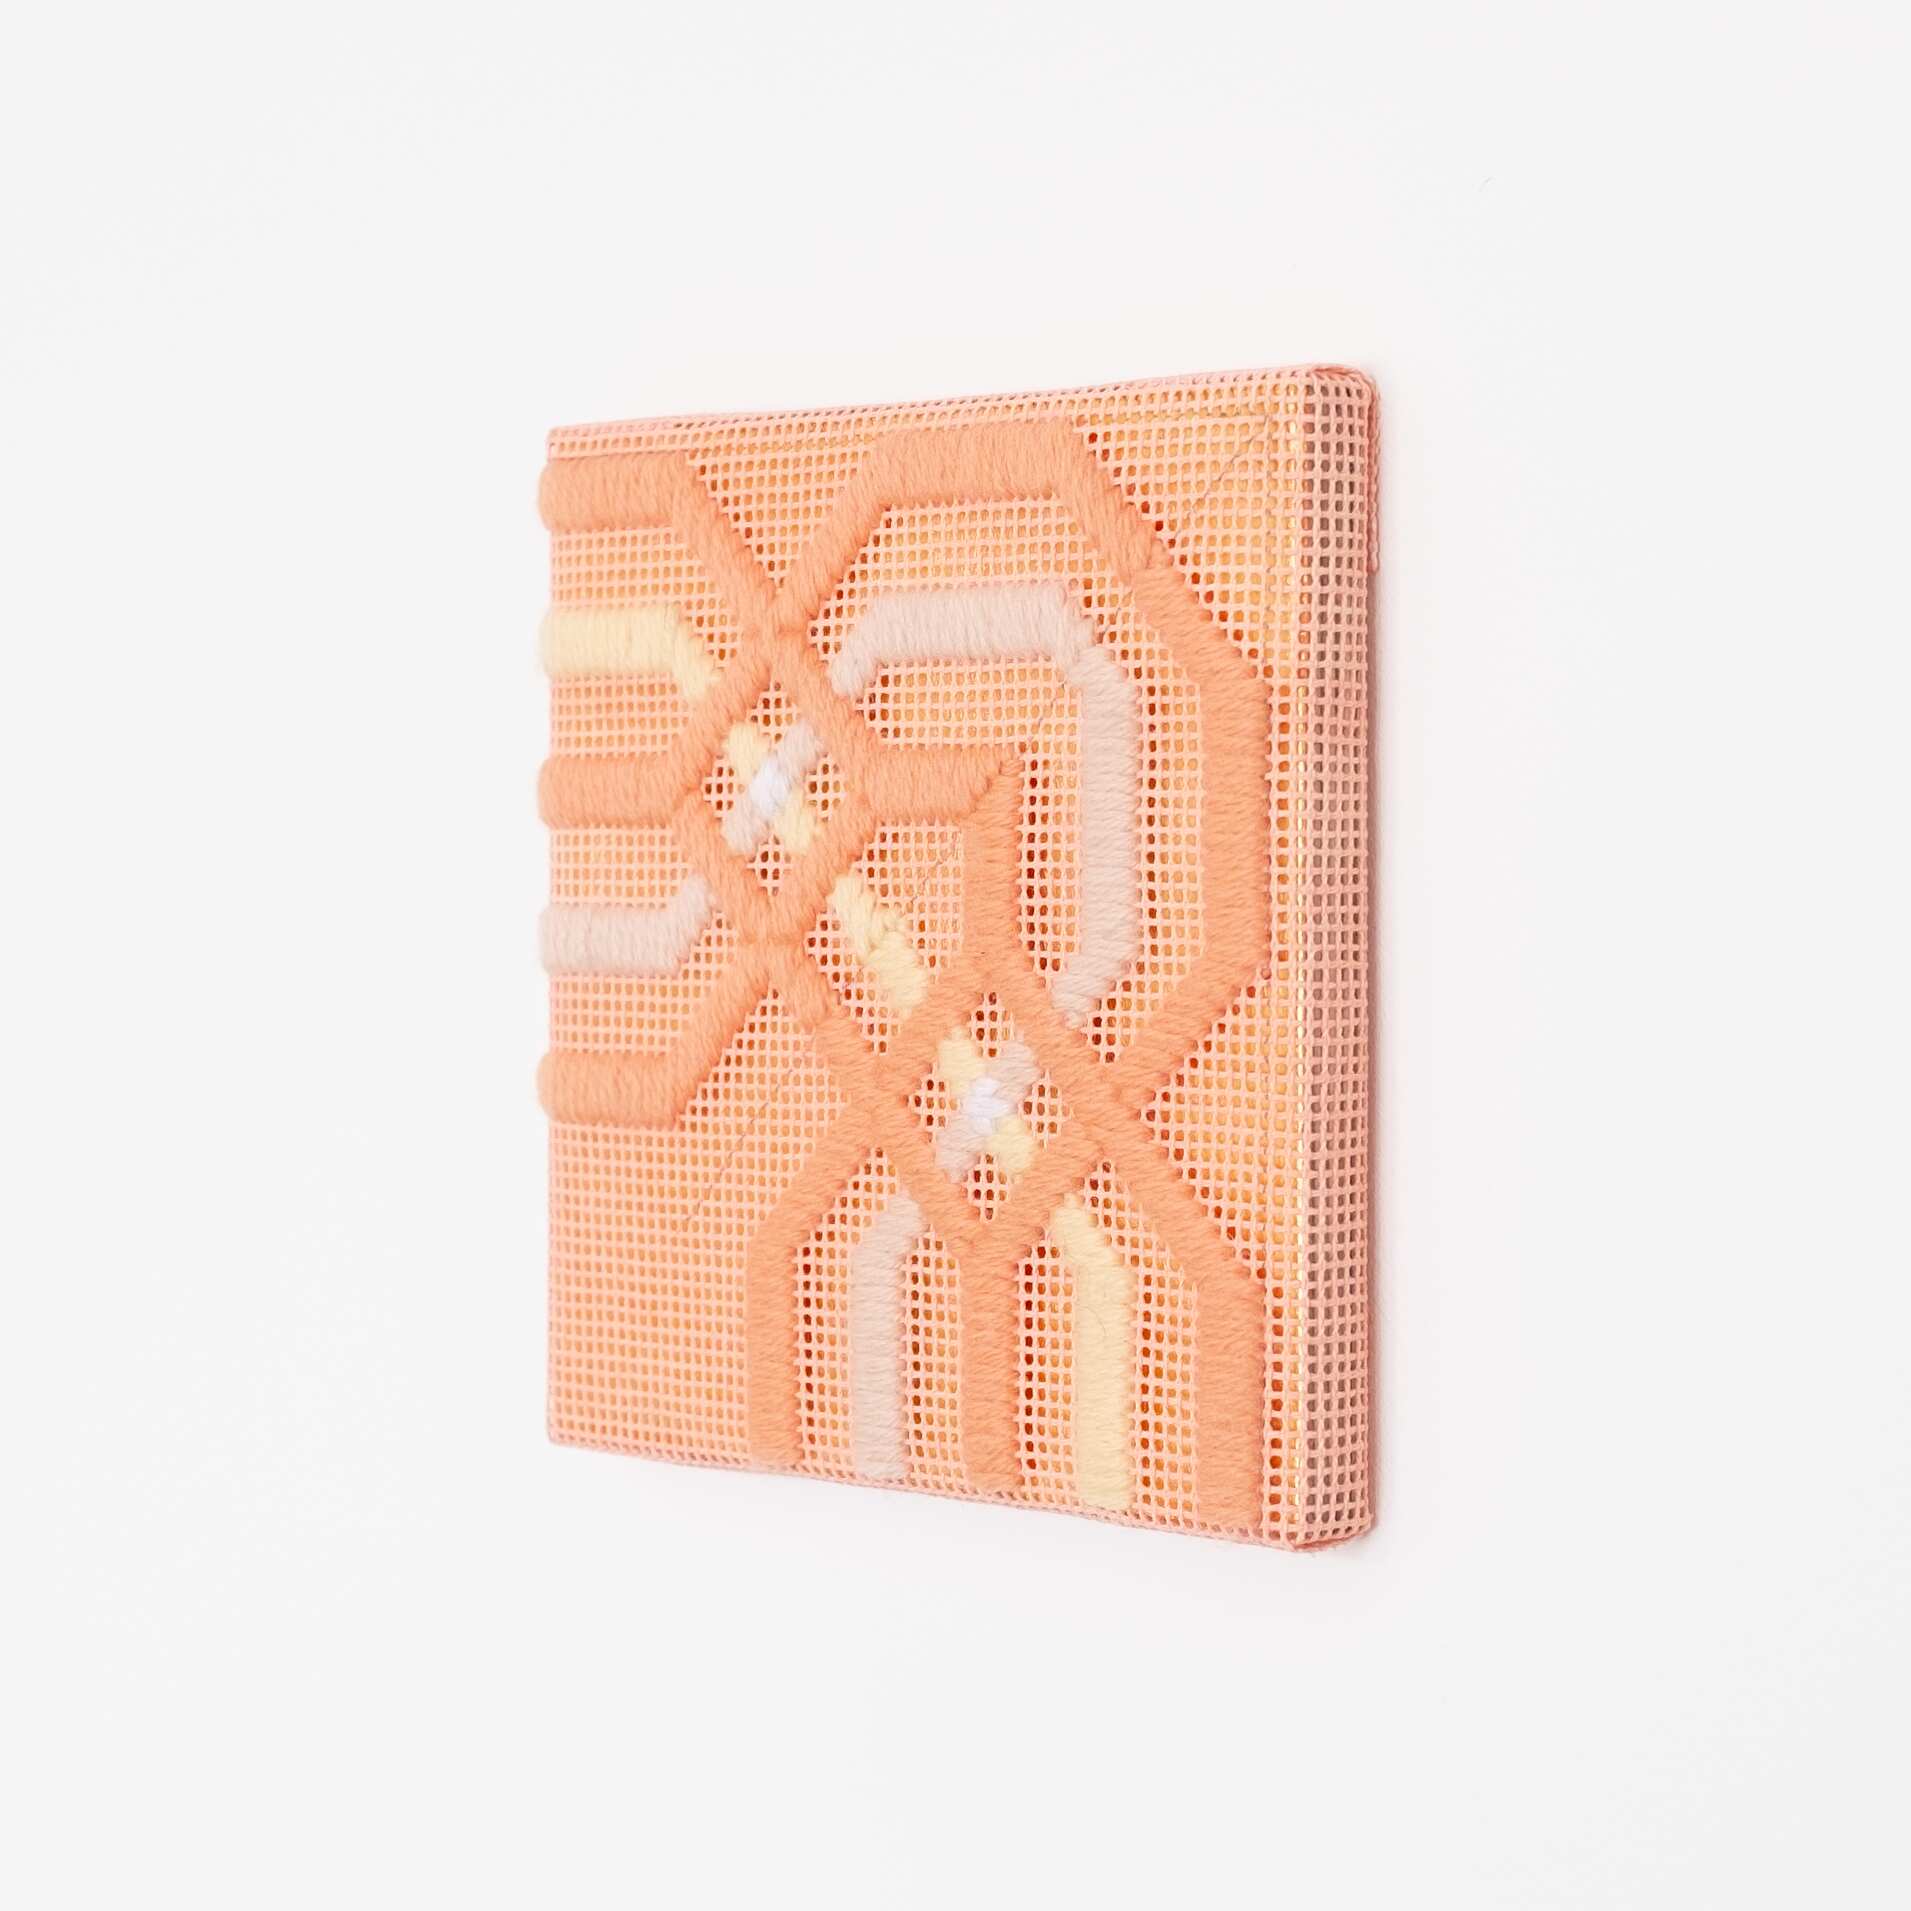 Border fragment [peach-yellow on peach], Hand-embroidered wool thread and acrylic paint on canvas over gilded panel, 2021